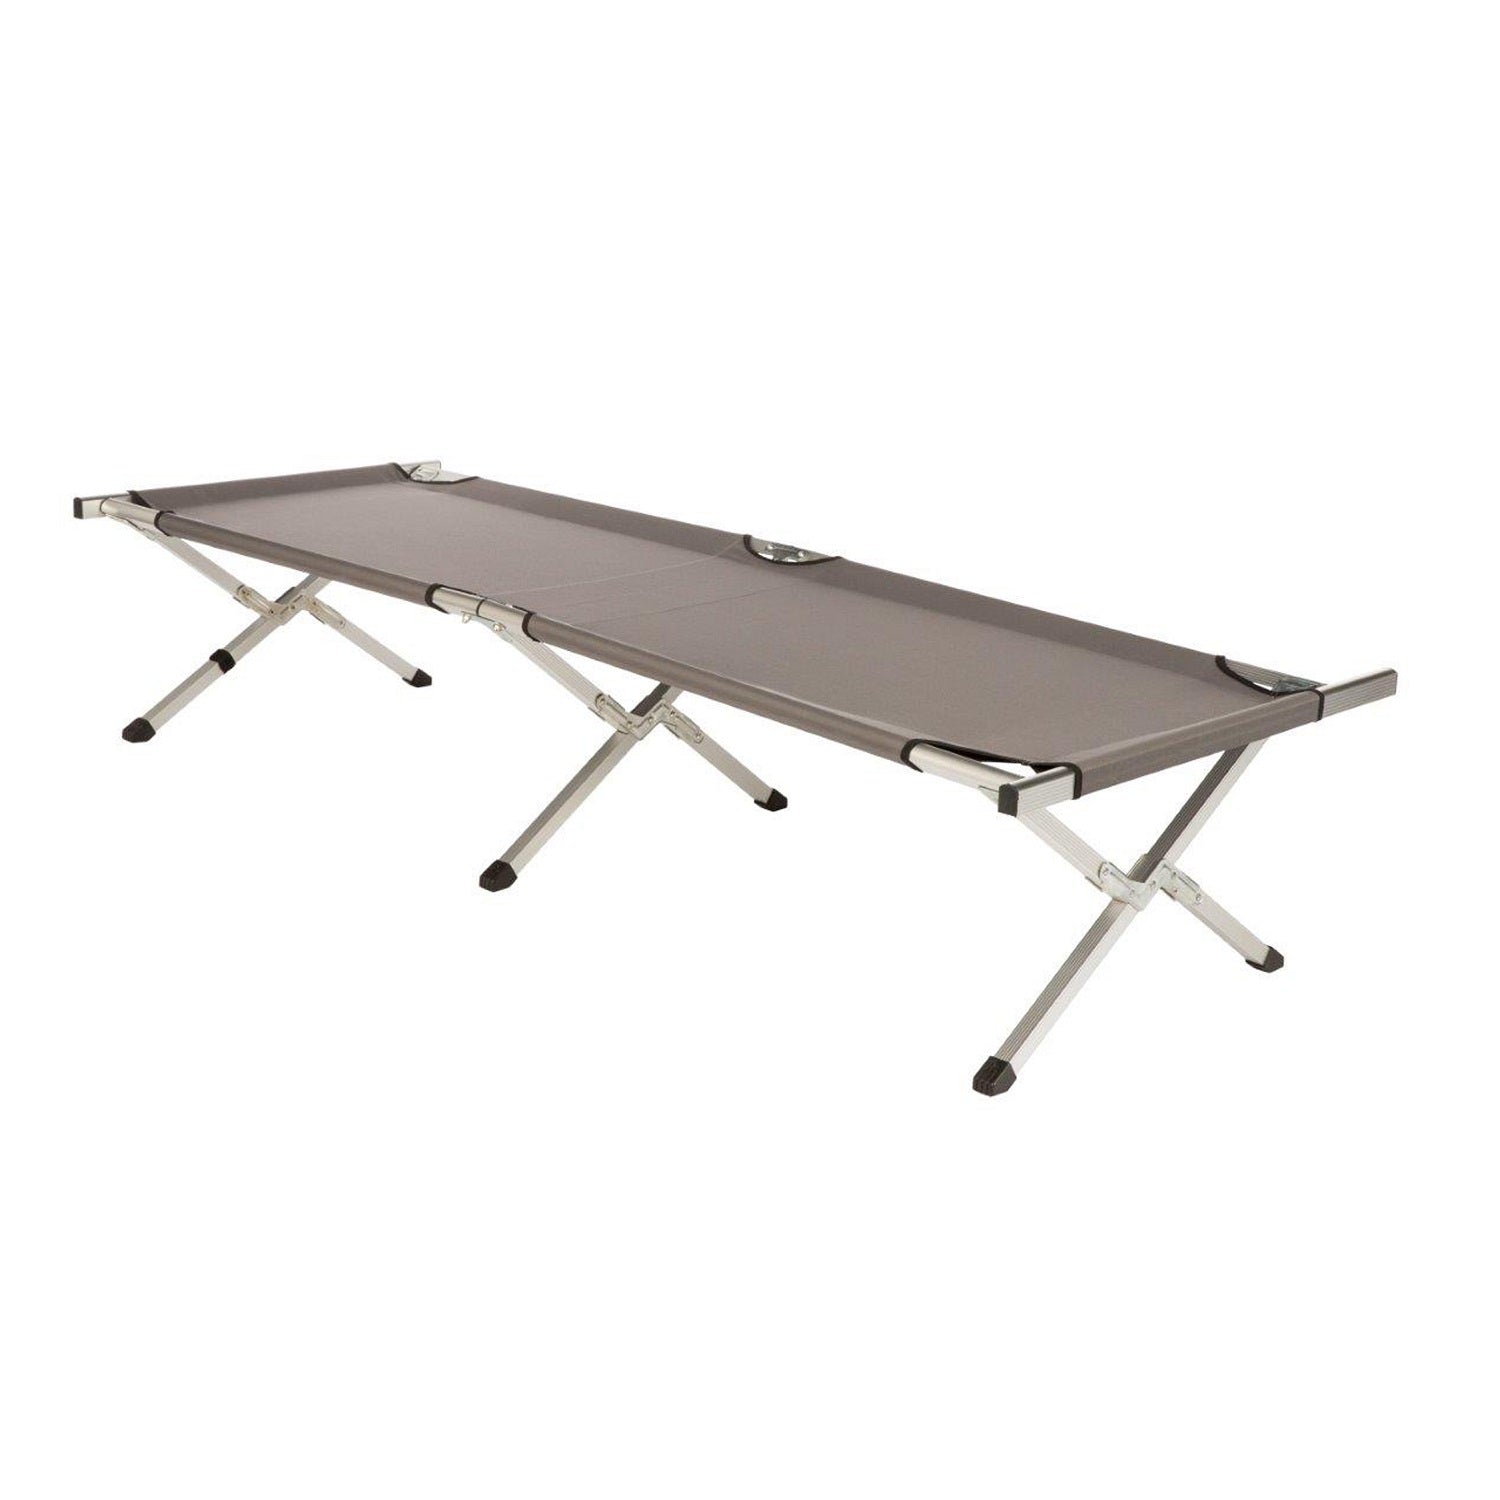 Kamp-Rite Military Style Folding Cot with Carry Bag